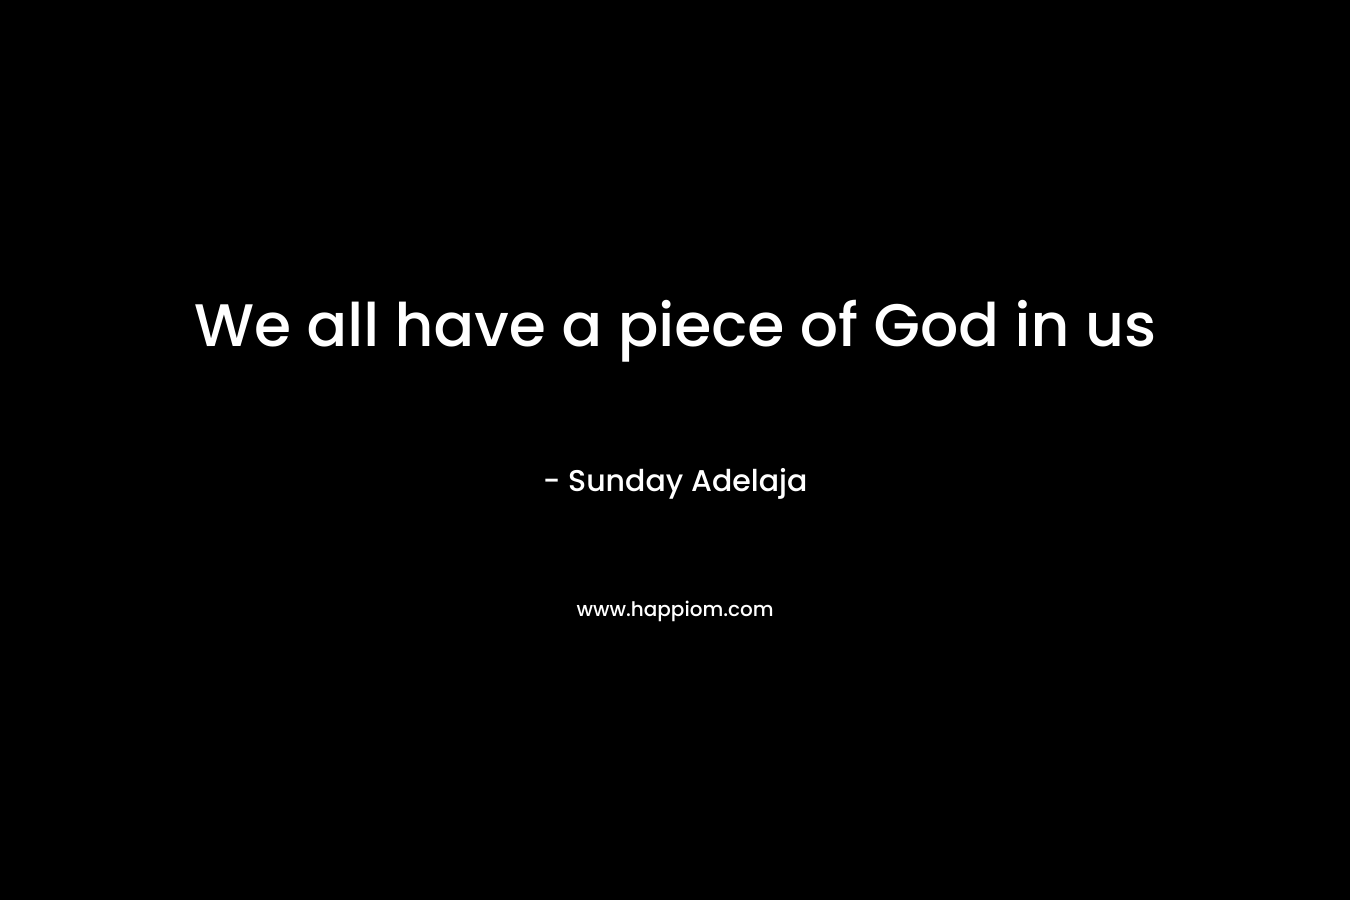 We all have a piece of God in us